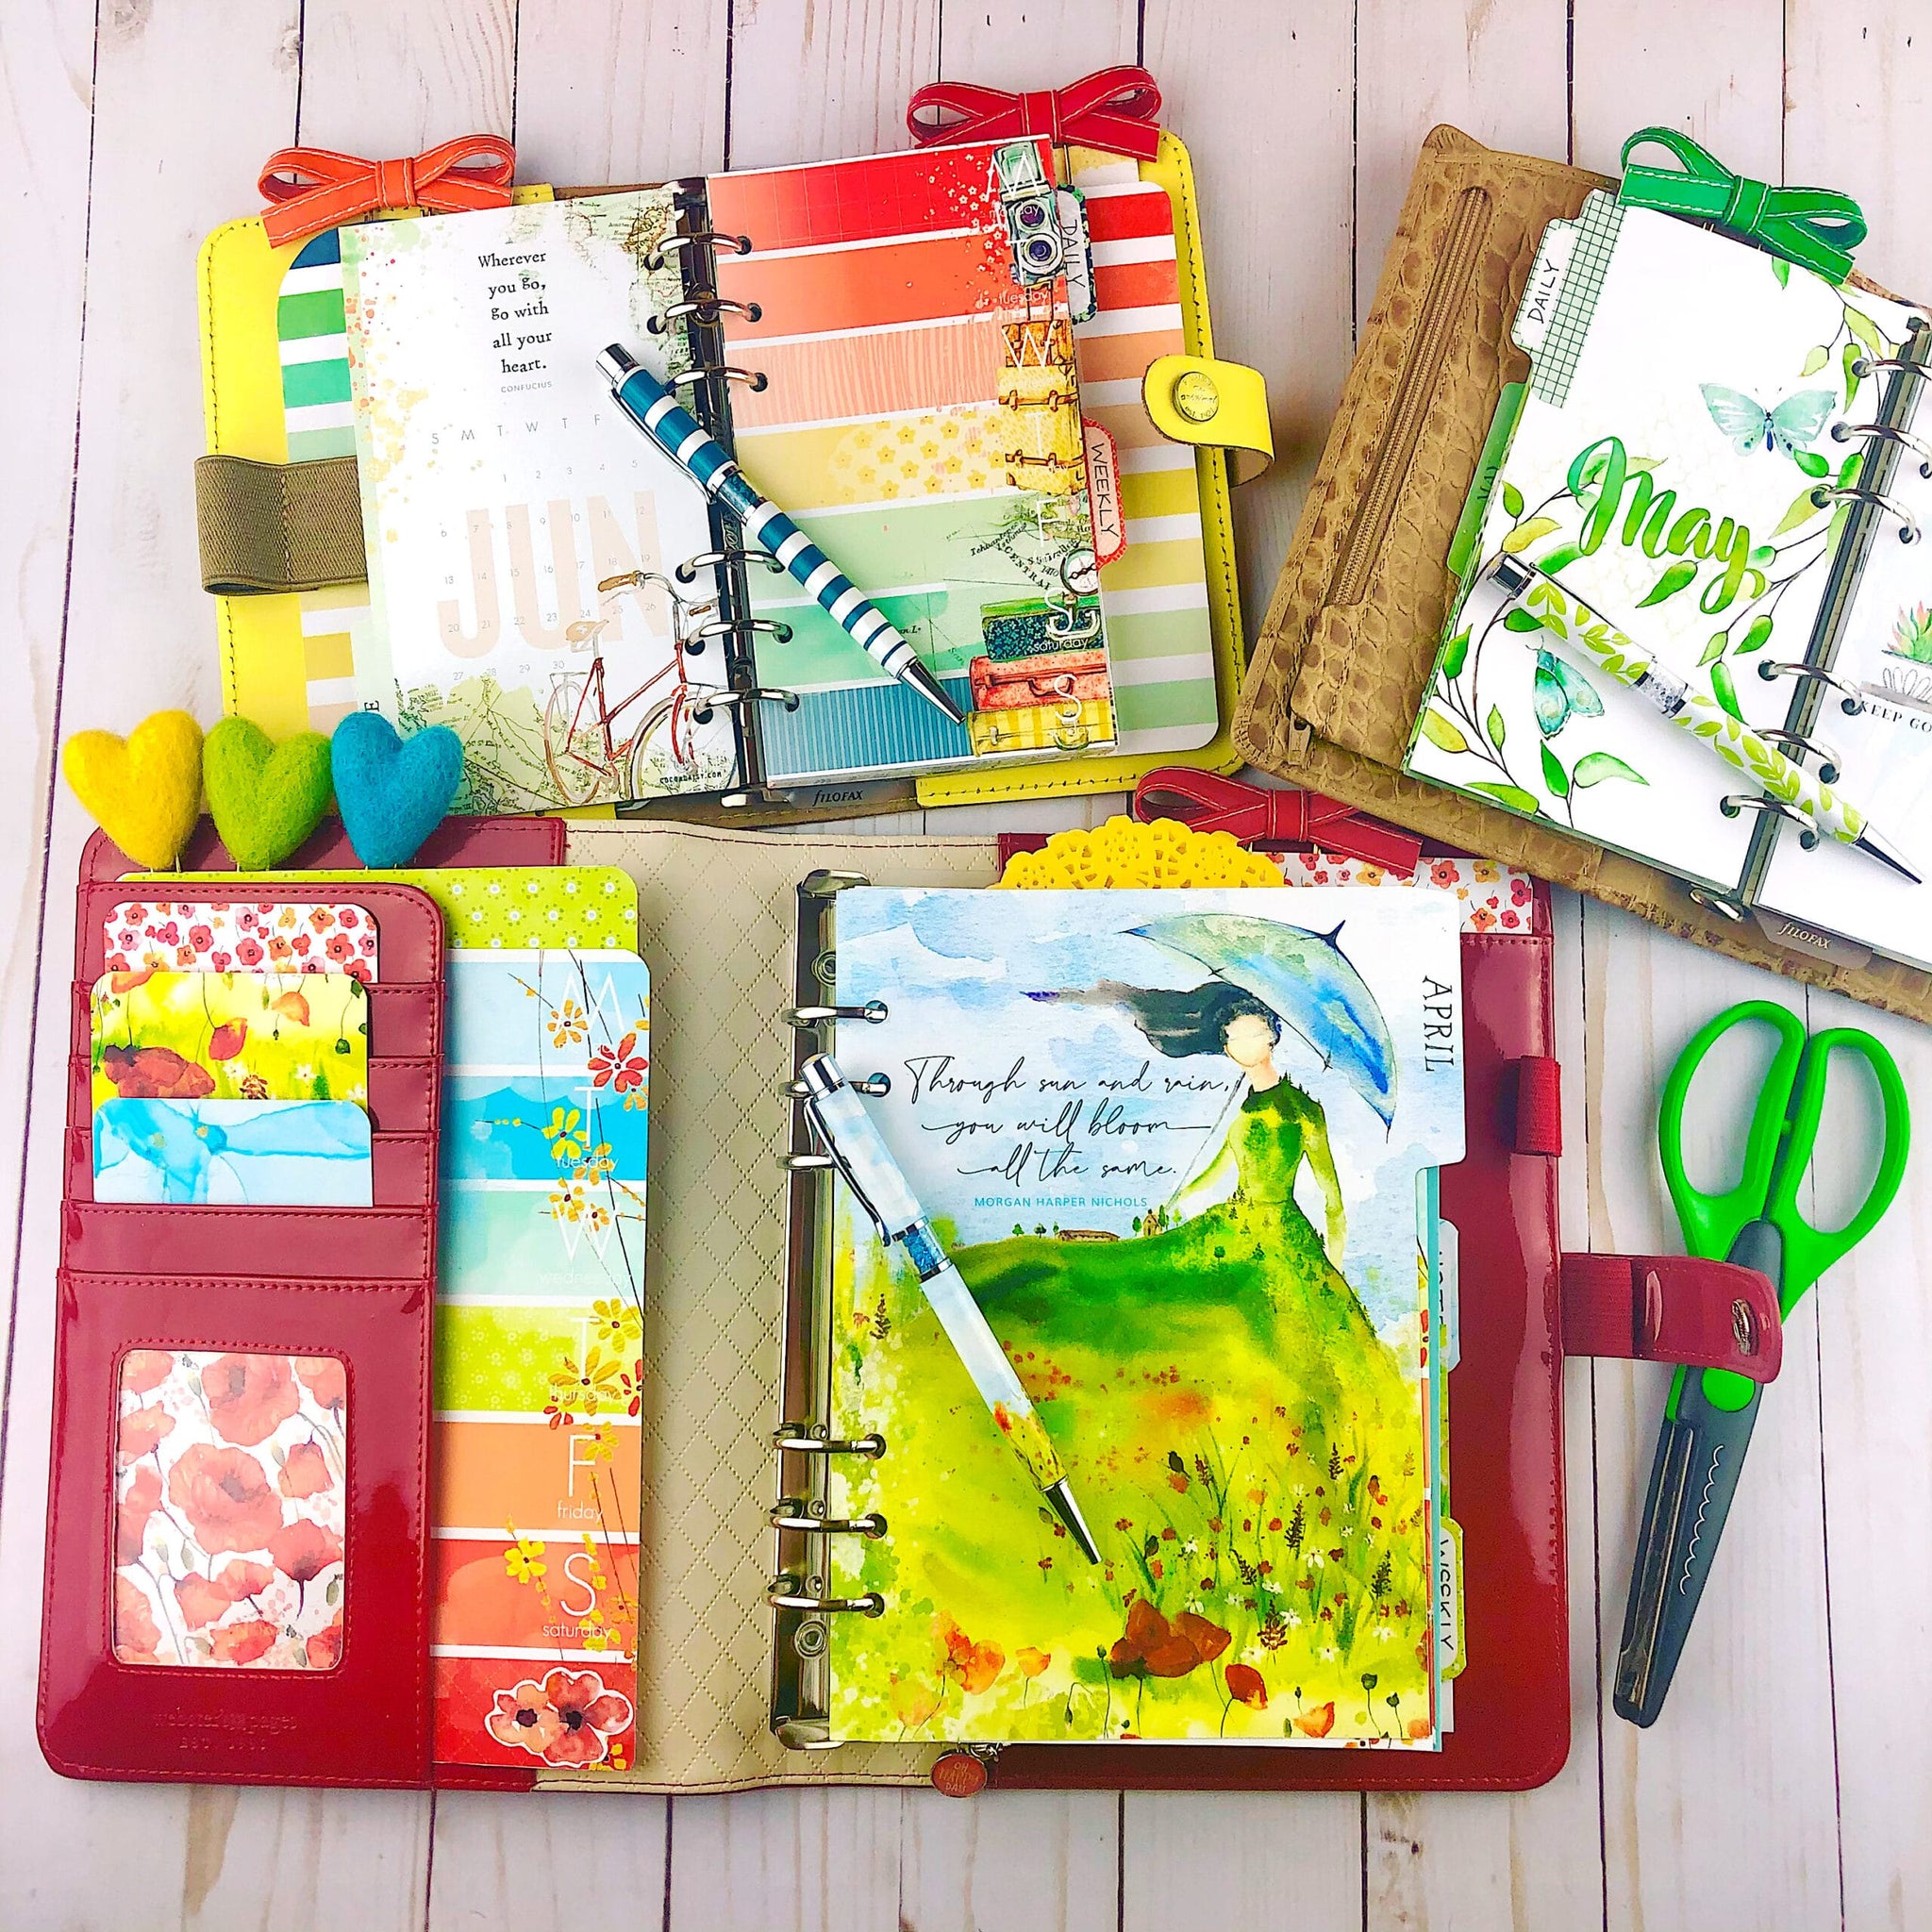 Quick Tips To Decorate Your Planner!